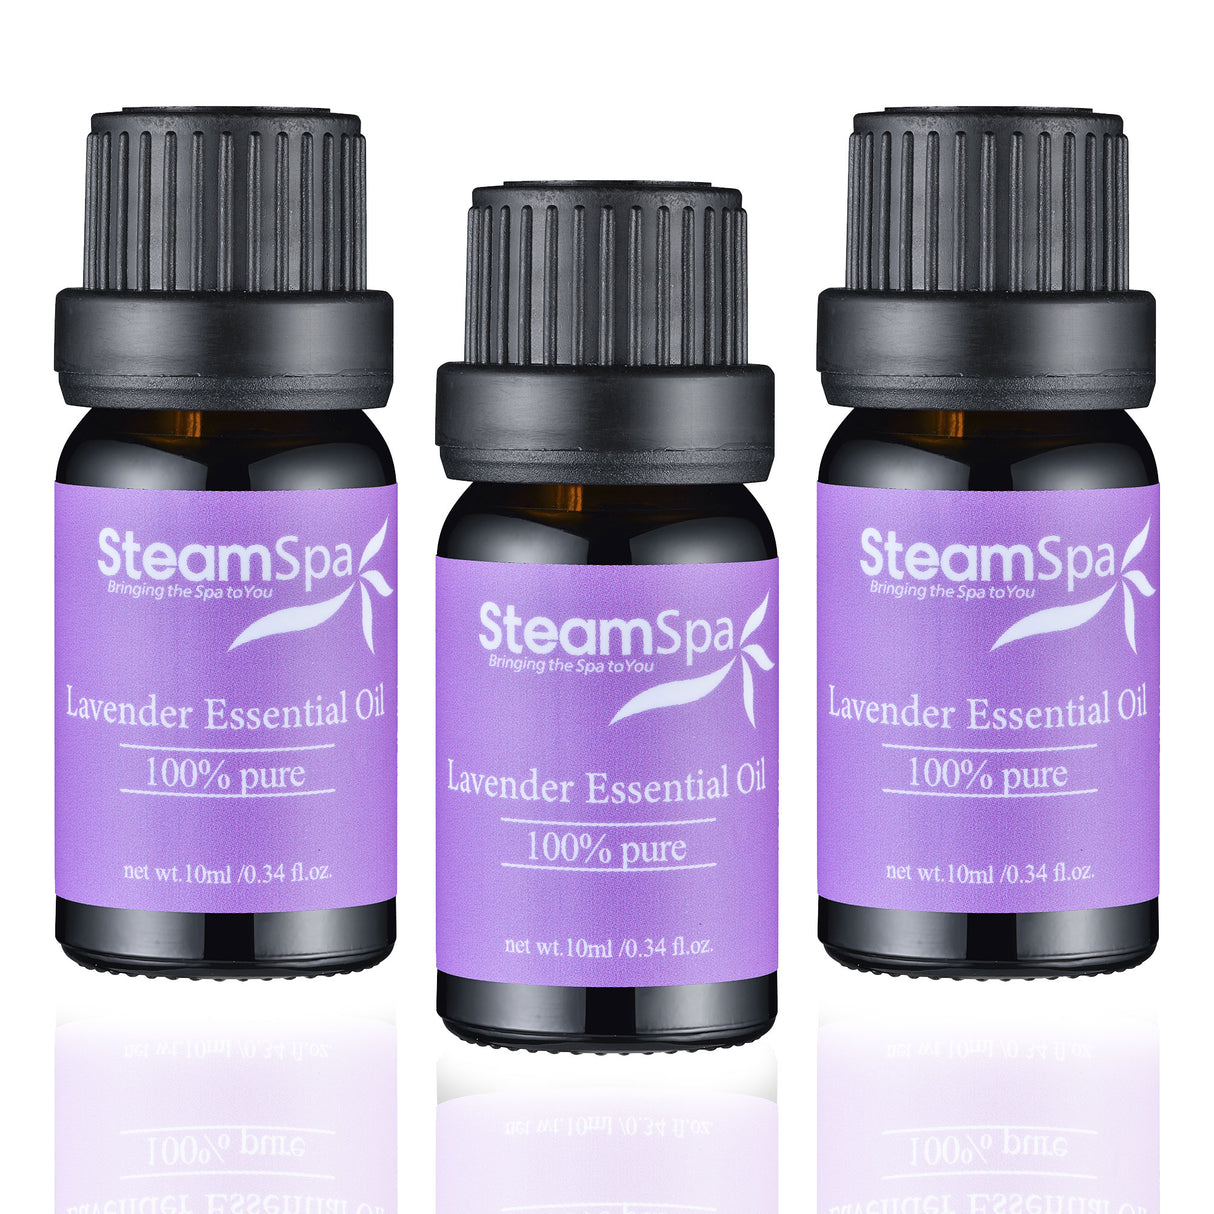 SteamSpa Essence of Lavender Aromatherapy Oil Extract Value Pack G-OILLAV3